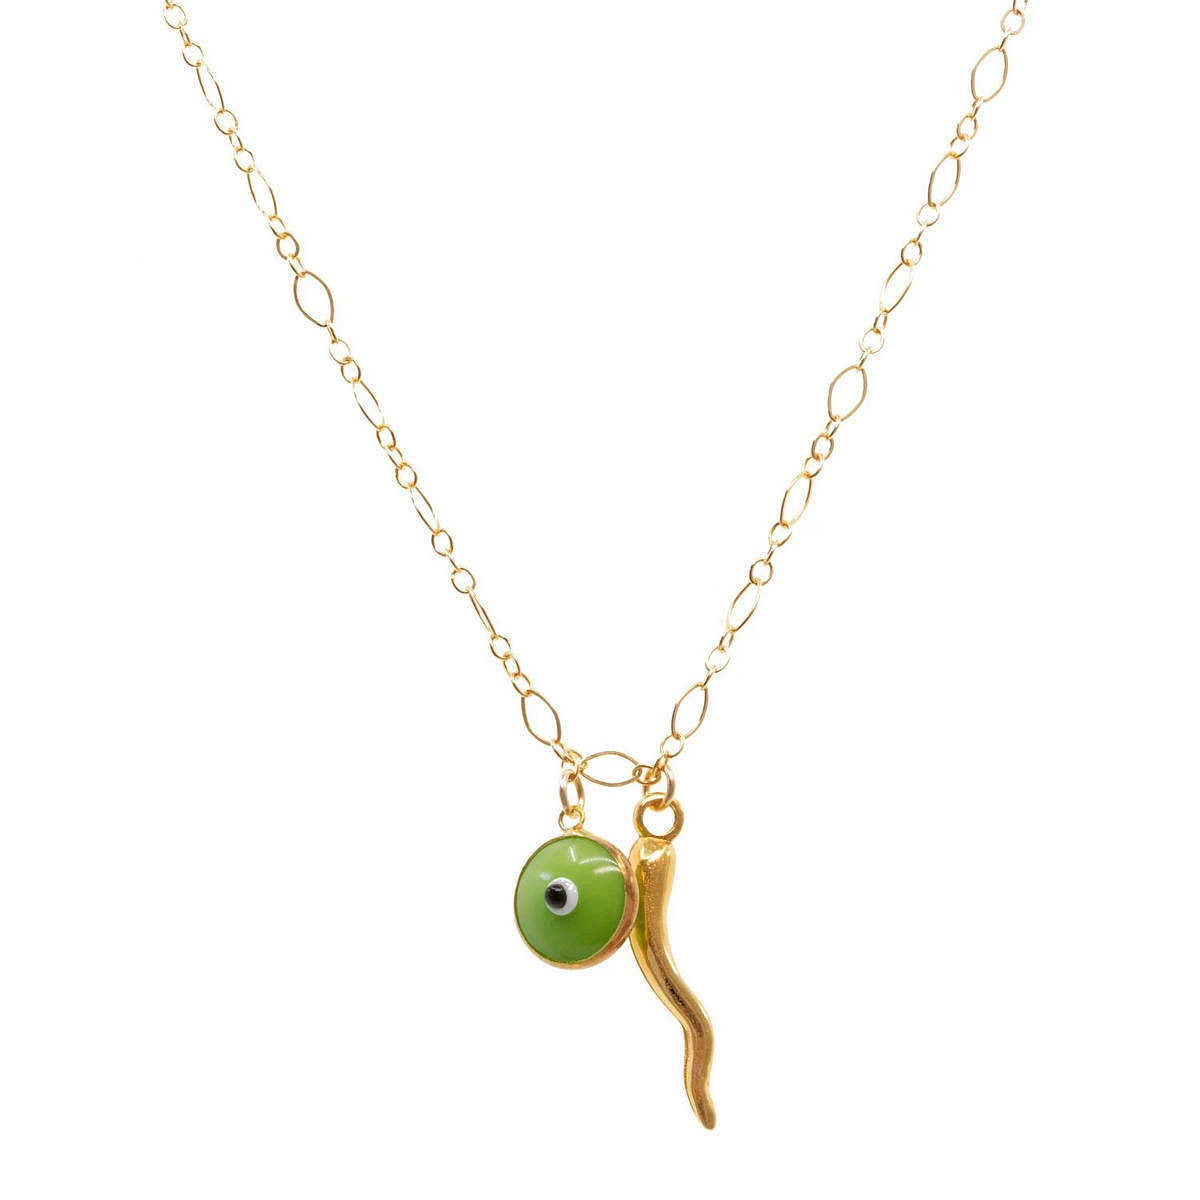 Double Dose Charm Necklace in Kelly Green